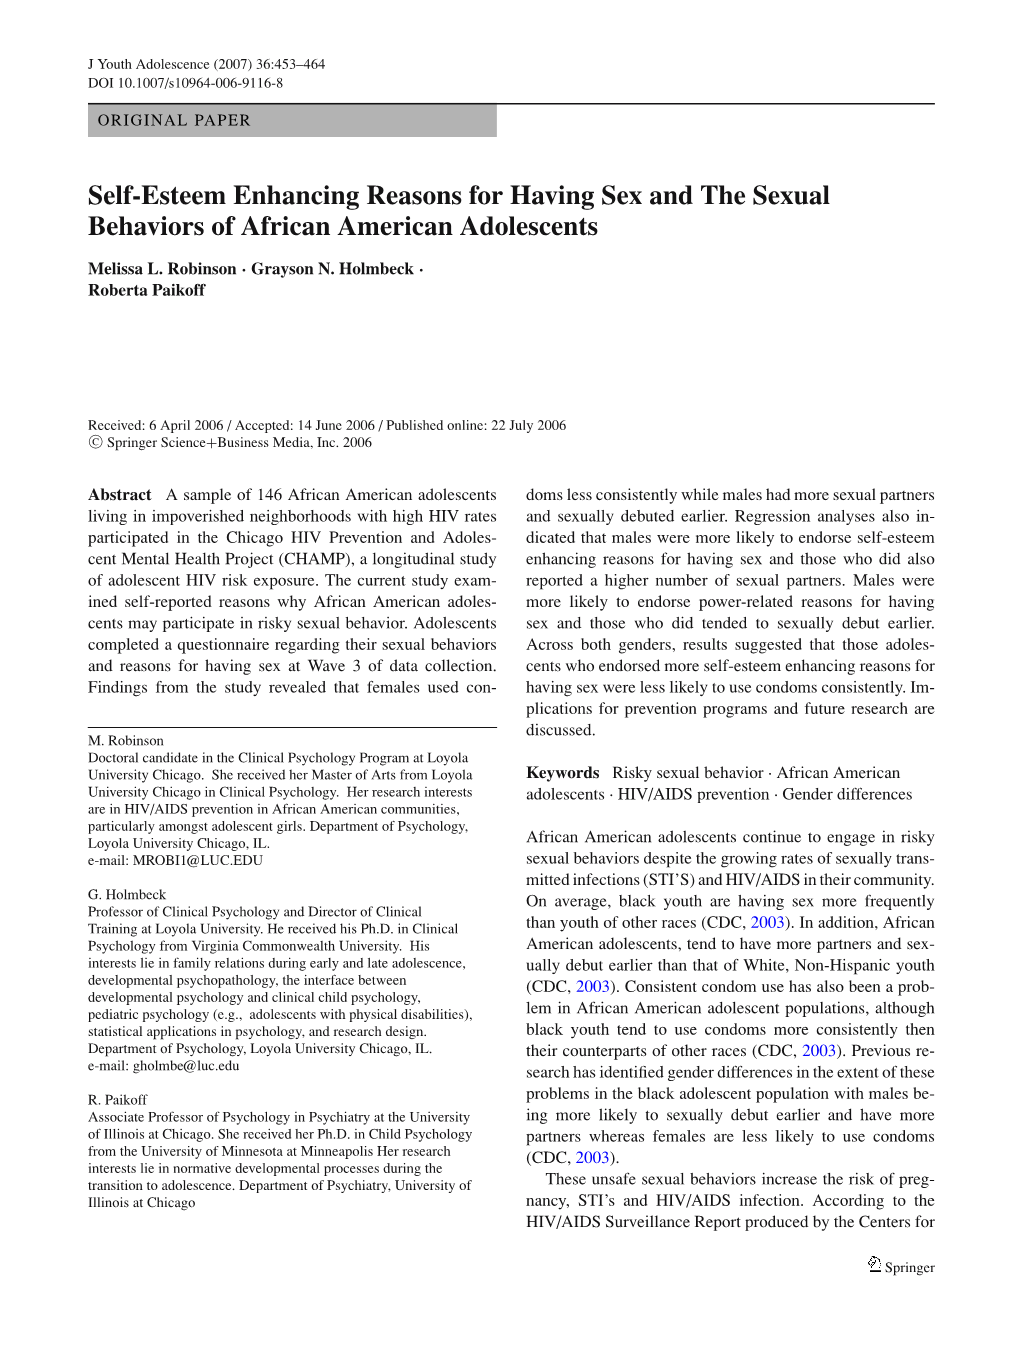 Self-Esteem Enhancing Reasons for Having Sex and the Sexual Behaviors of African American Adolescents